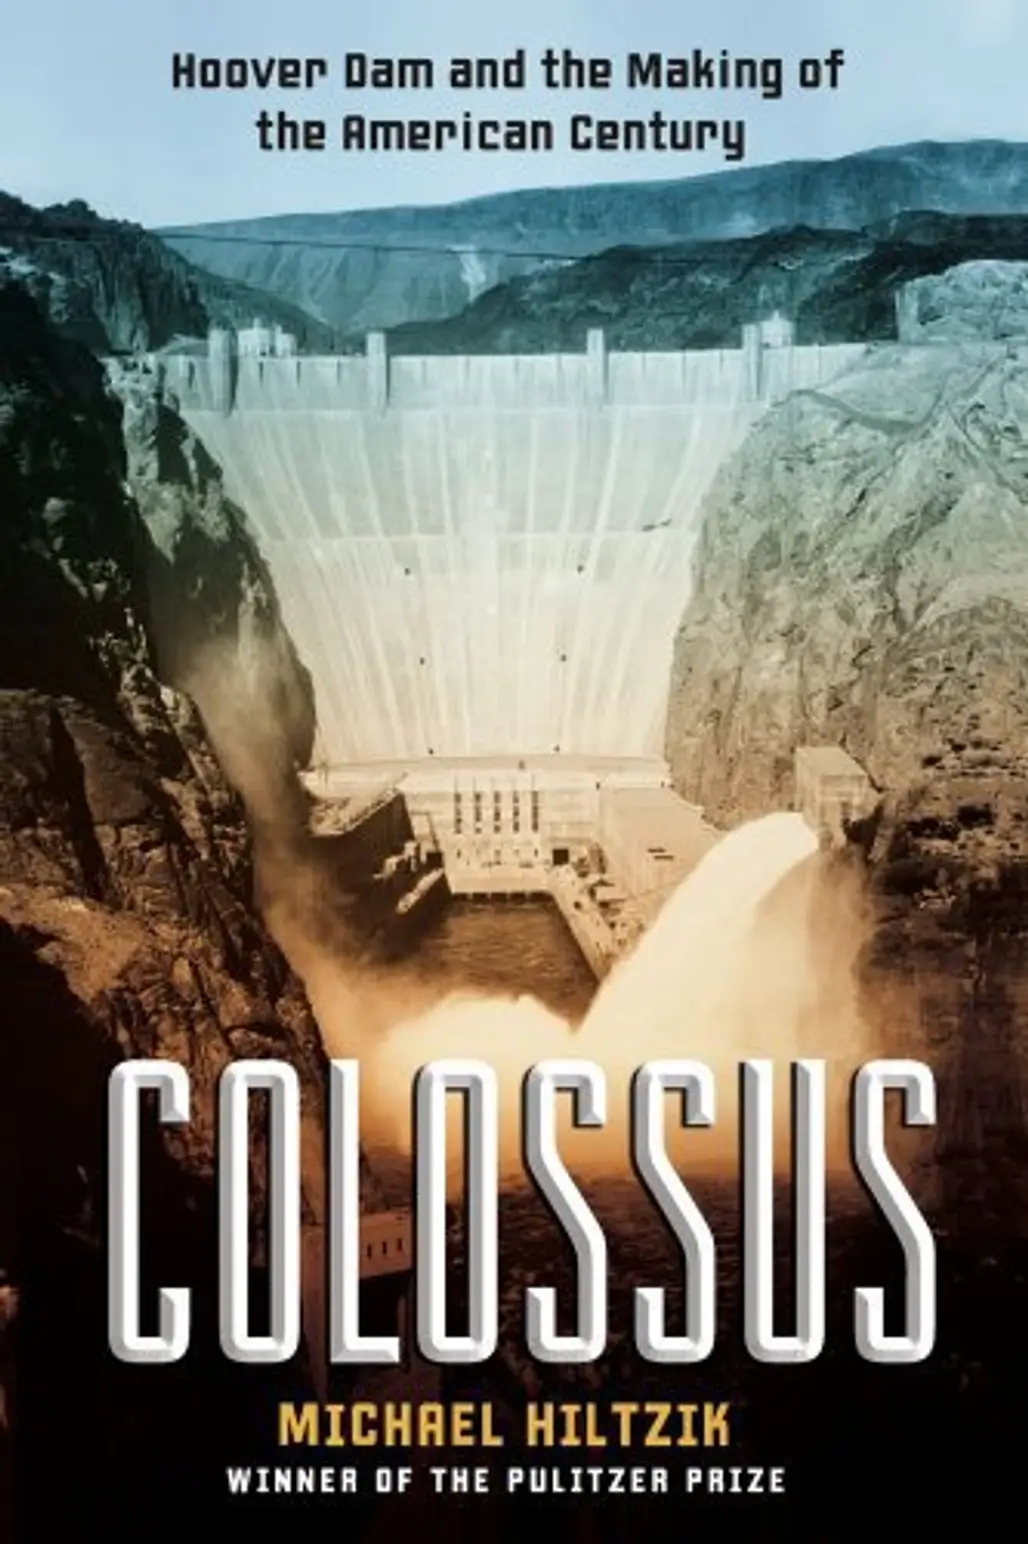 “Colossus: Hoover Dam and the Making of the American Century” by Michael a. Hitzik